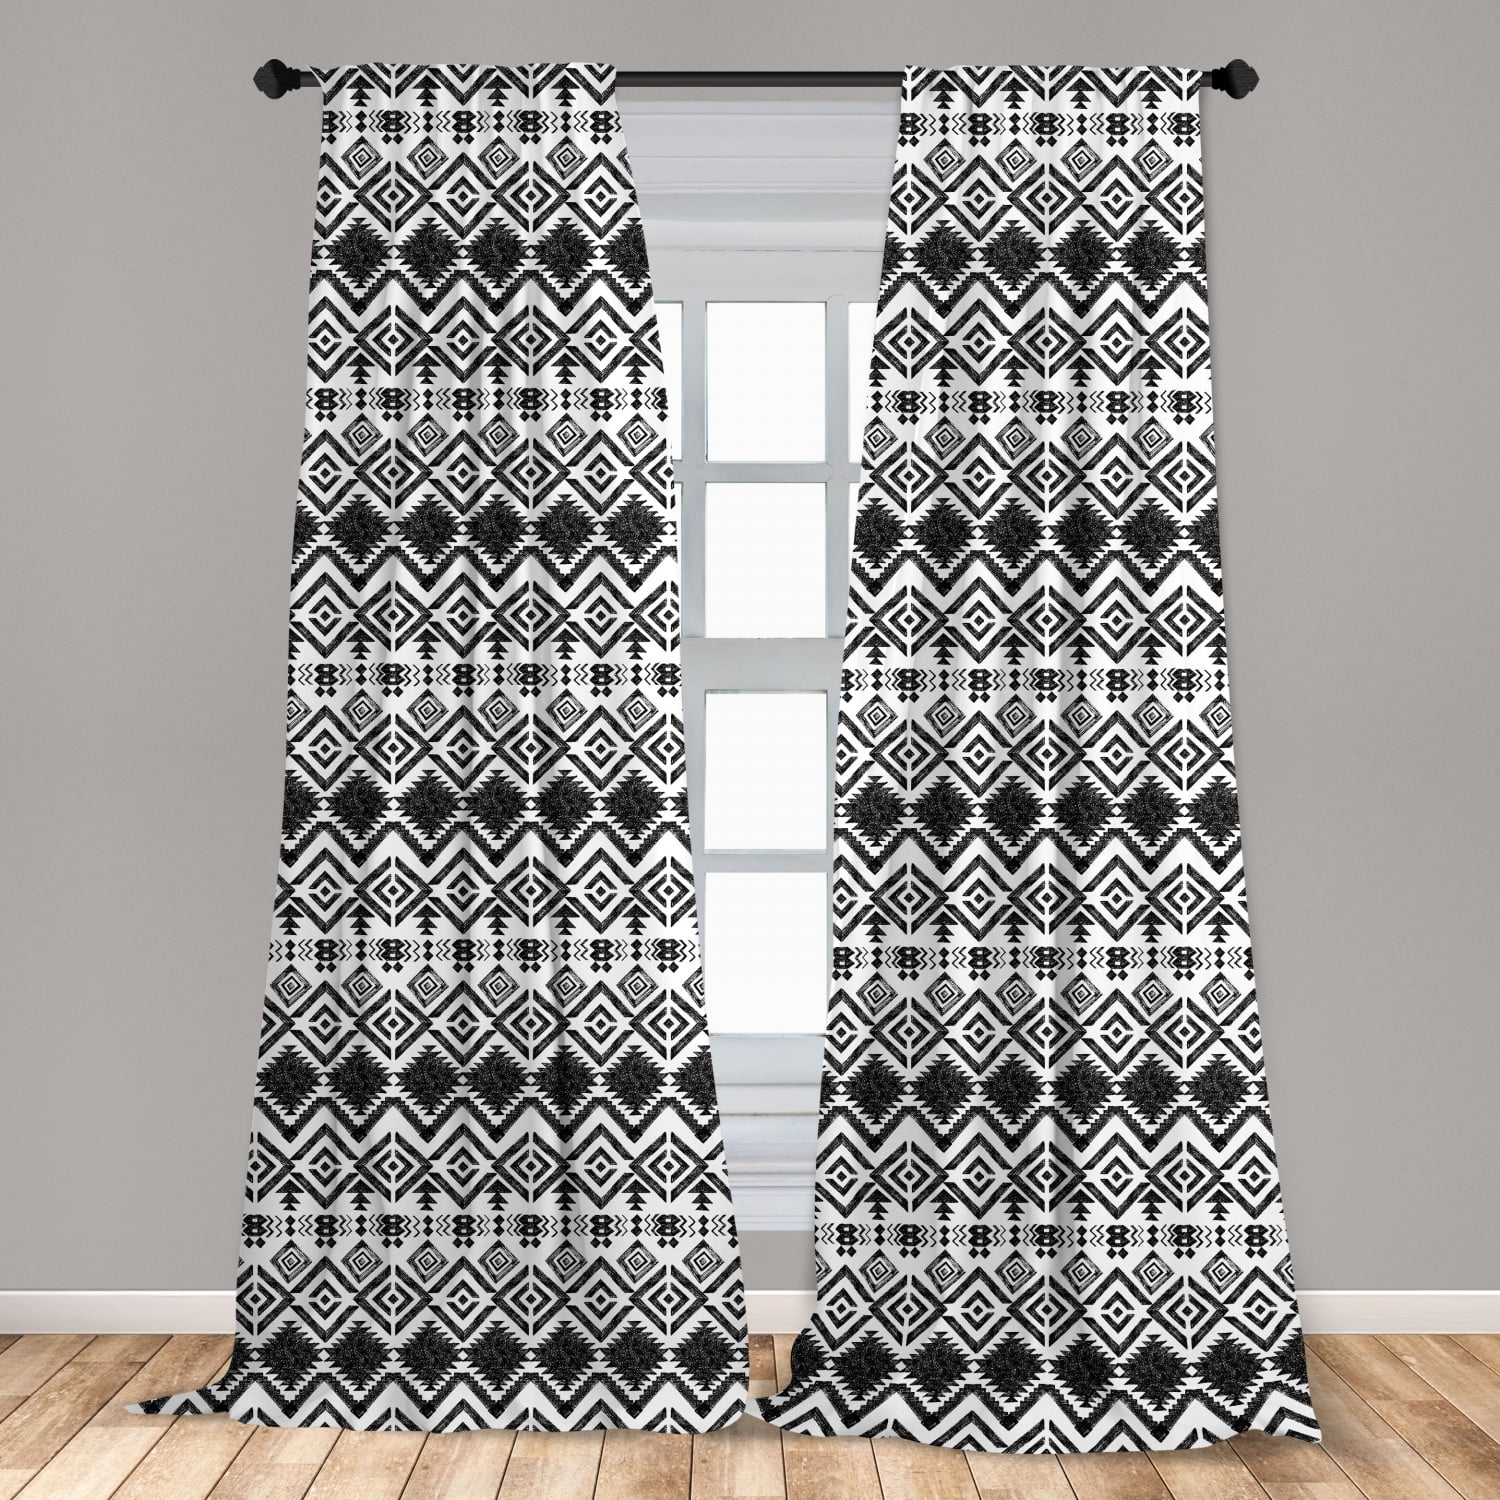 Black and White Curtain Panels Window Treatments Drapes Modern Curtains Decor 